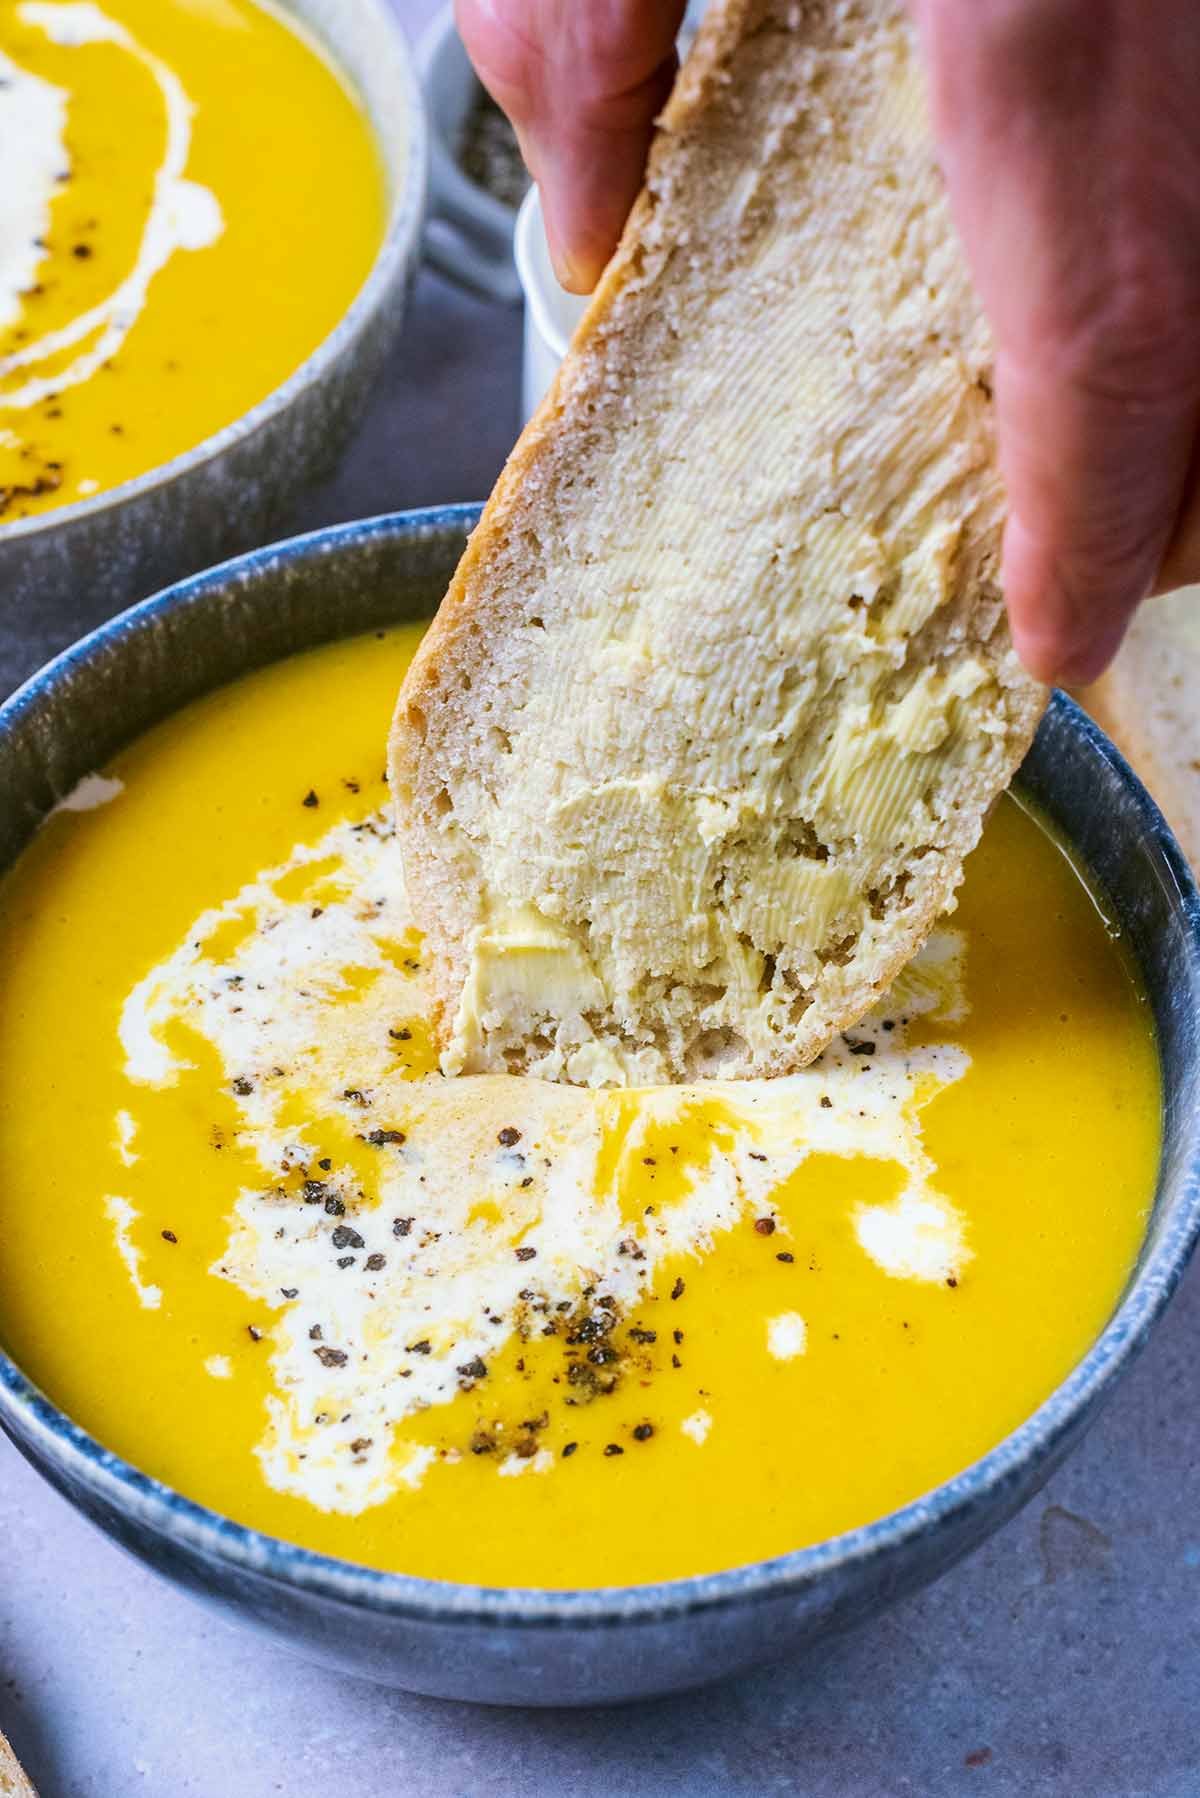 A slice of buttered bread being dipped into a bowl of creamy soup.